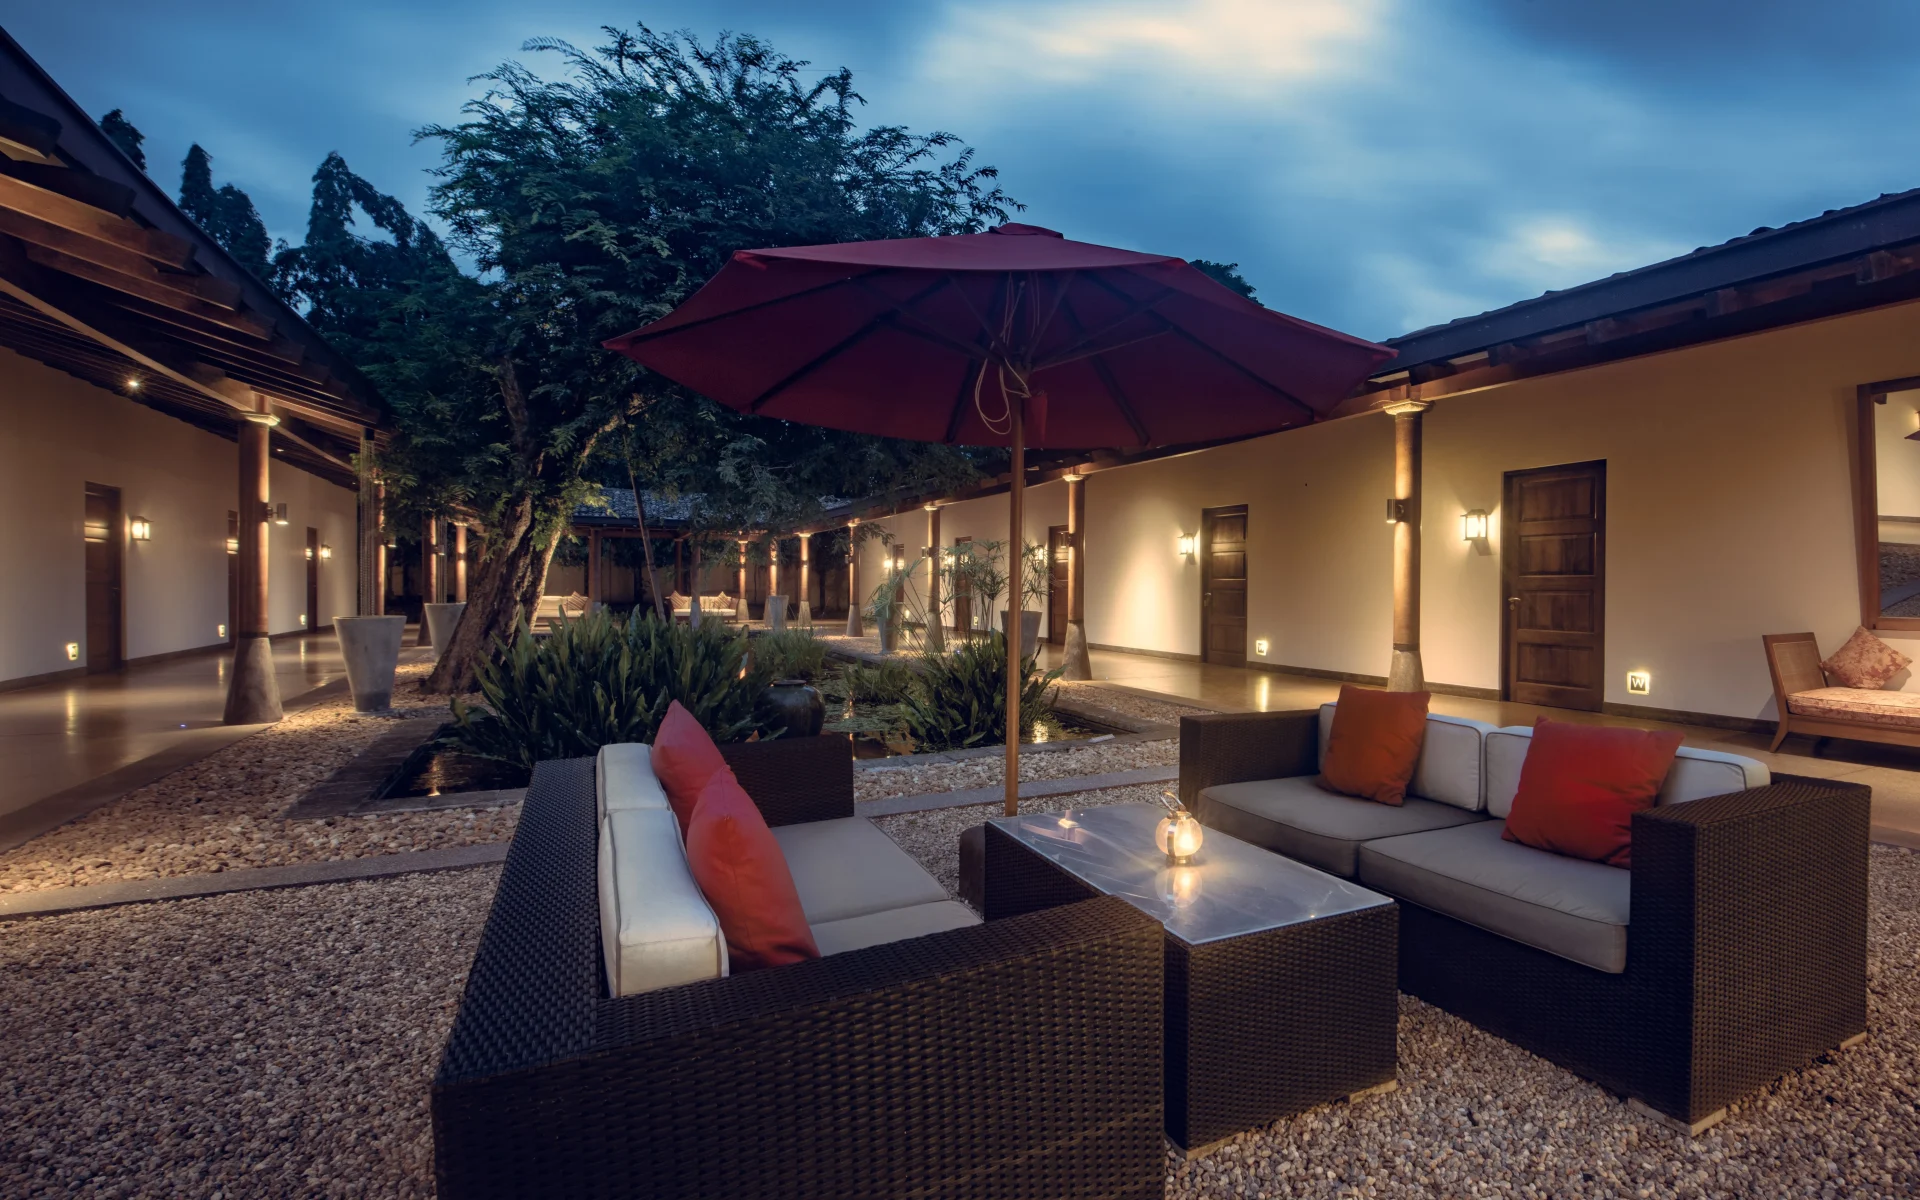 The communal outdoor area at the hotel is set in a pebbled courtyard. Two large outdoor sofas are placed either side of a coffee table.